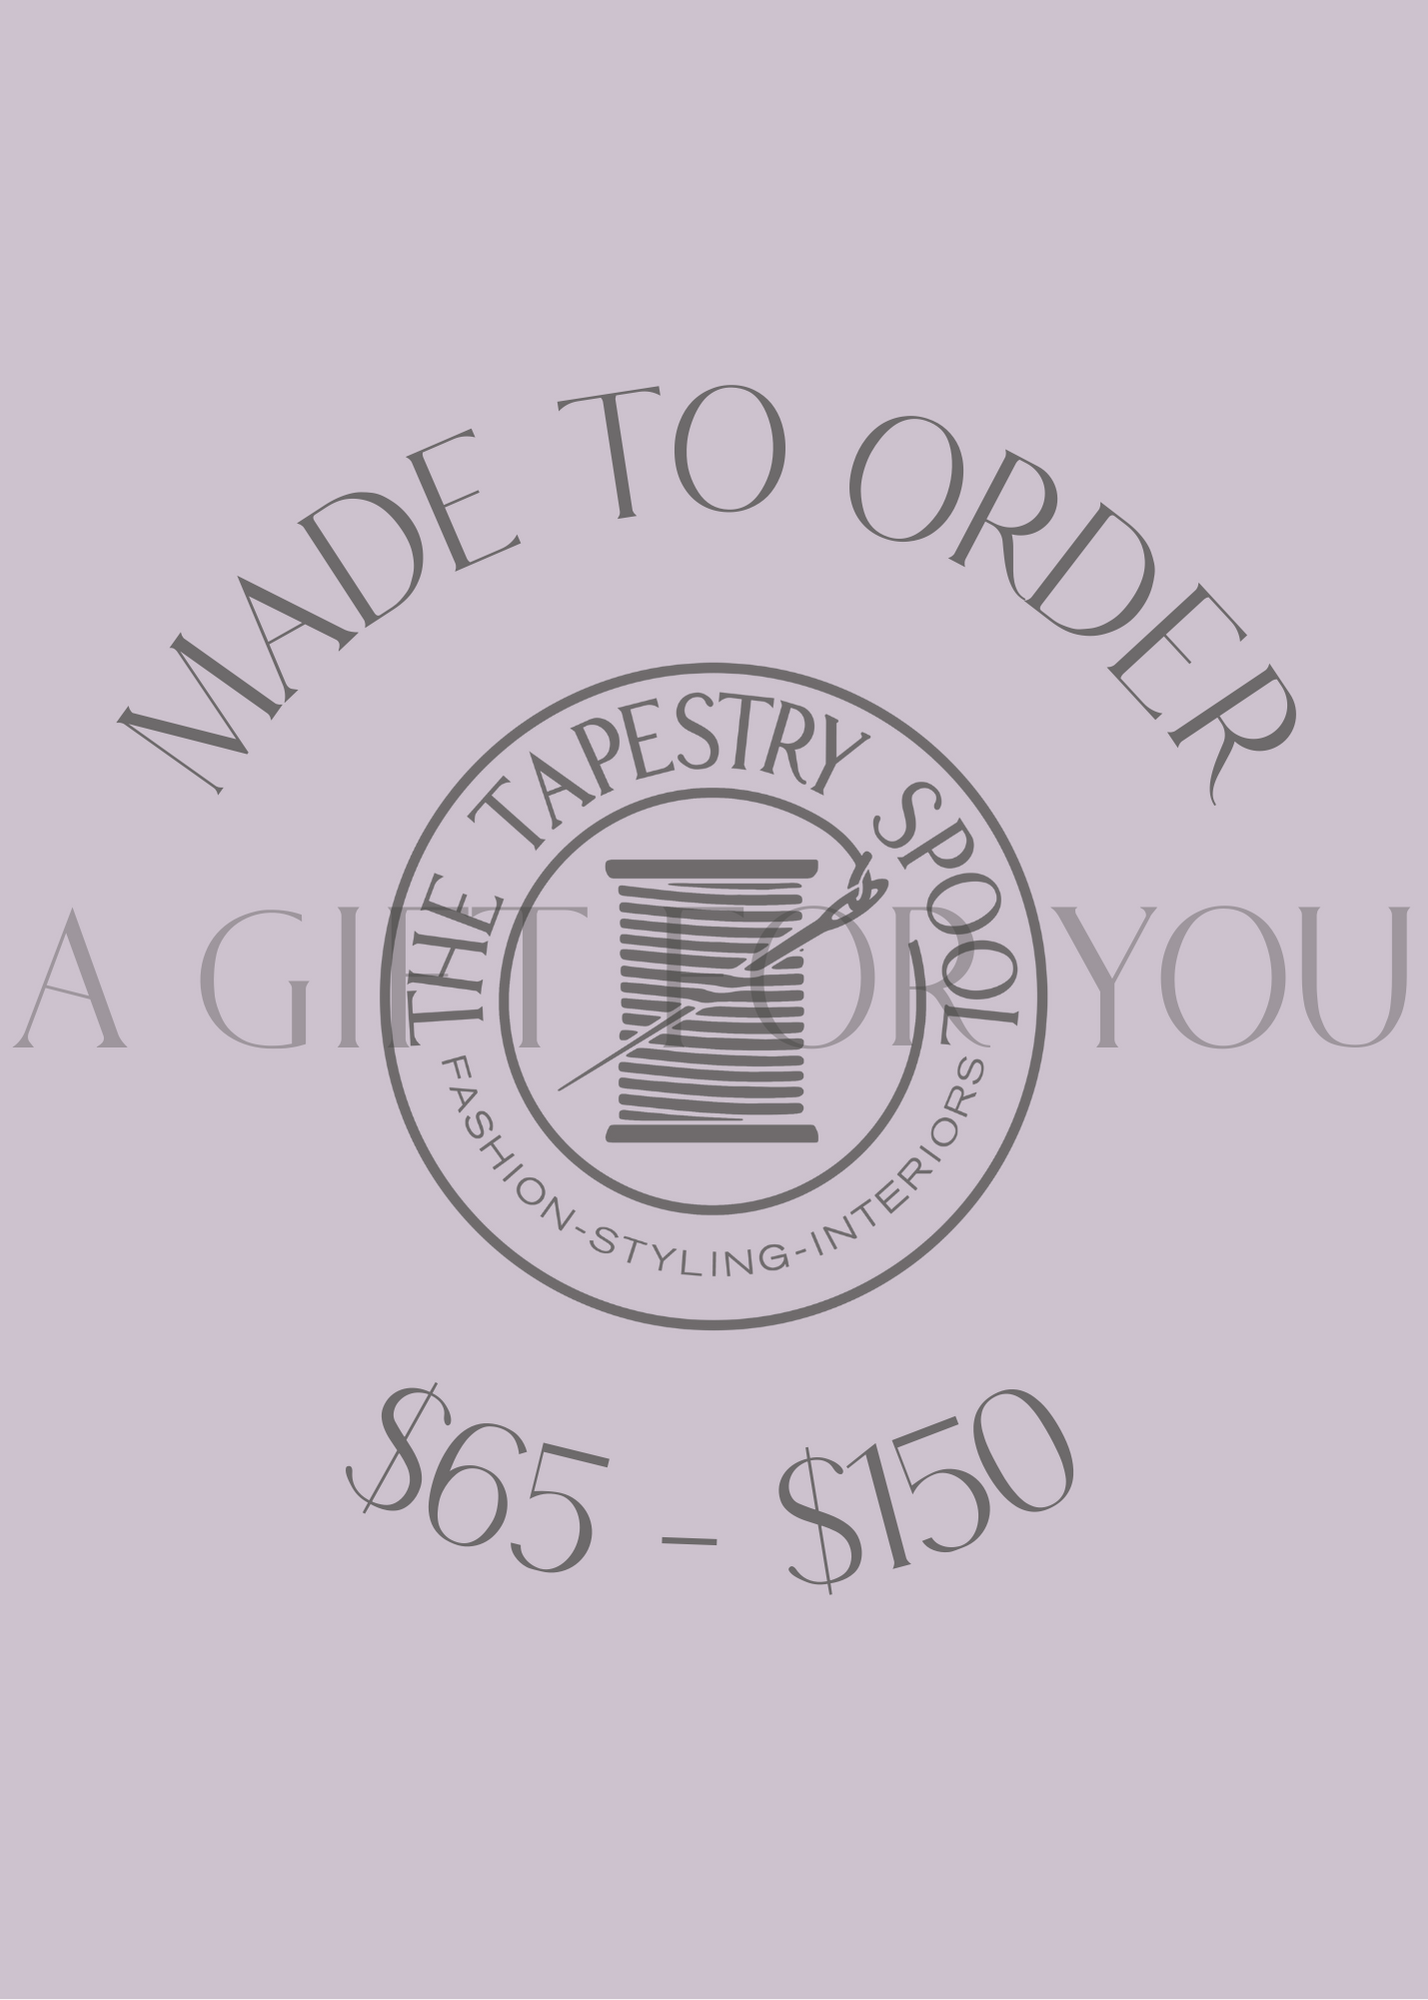 Made To Order - Gift